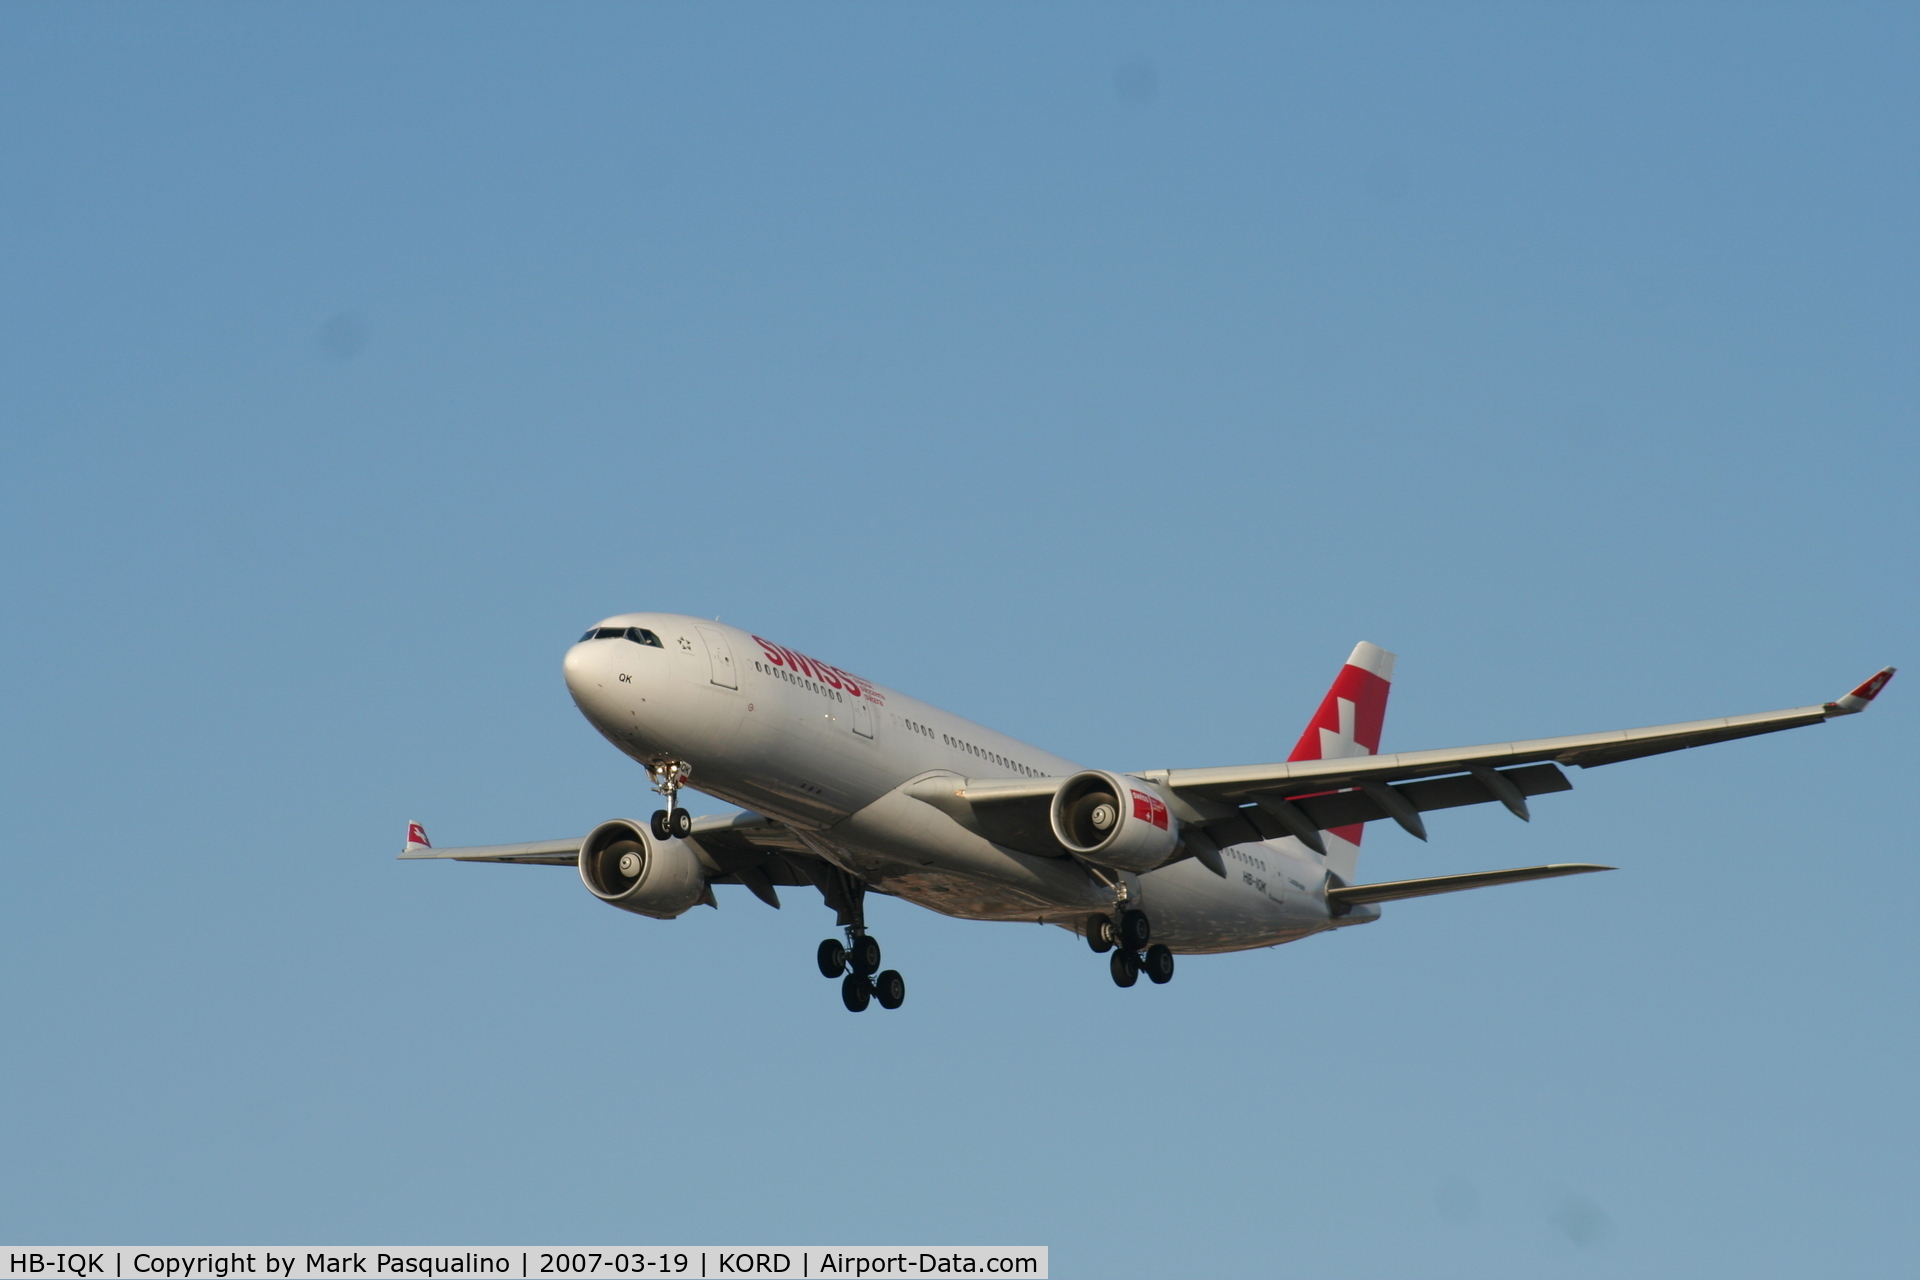 HB-IQK, 1999 Airbus A330-223 C/N 299, Airbus A330-200